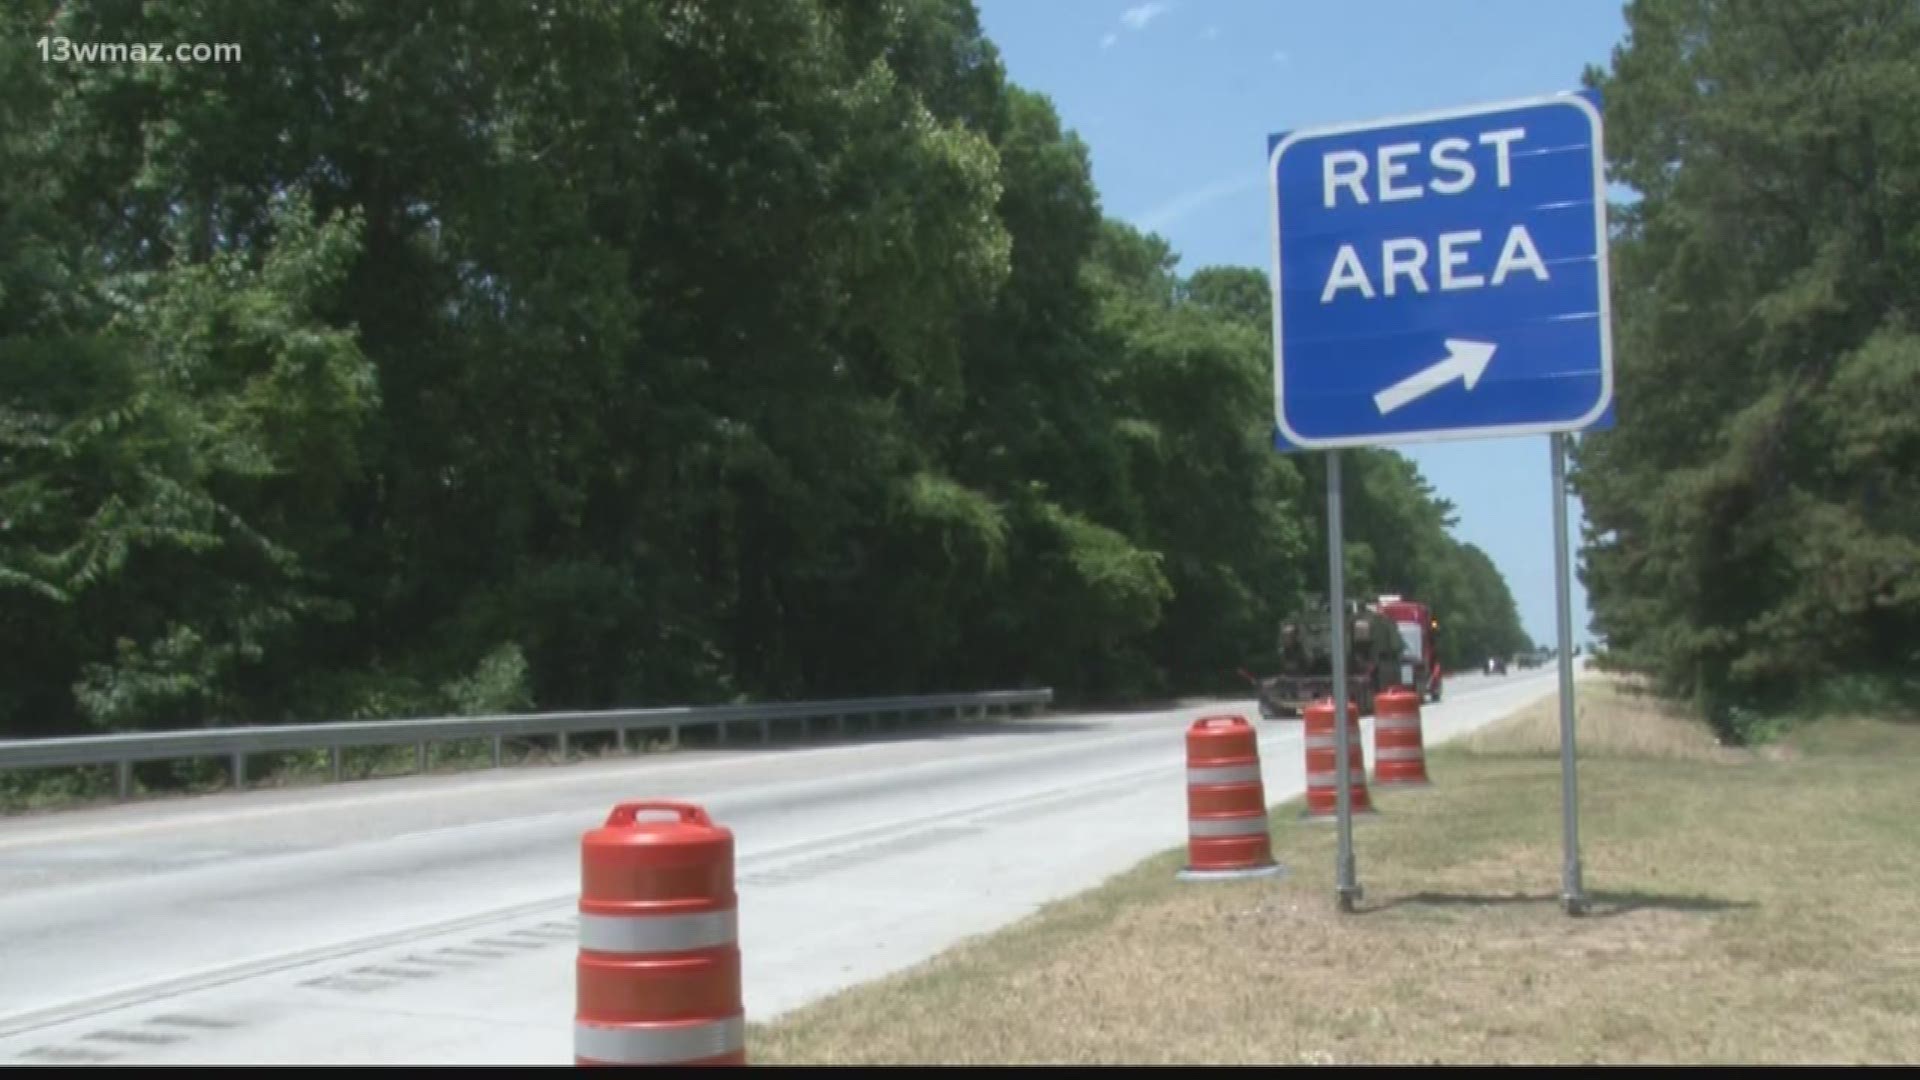 A water main break caused both of Laurens County's rest areas on I-16 to shutdown for three months. But Dublin is planning to reopen them by the end of June.